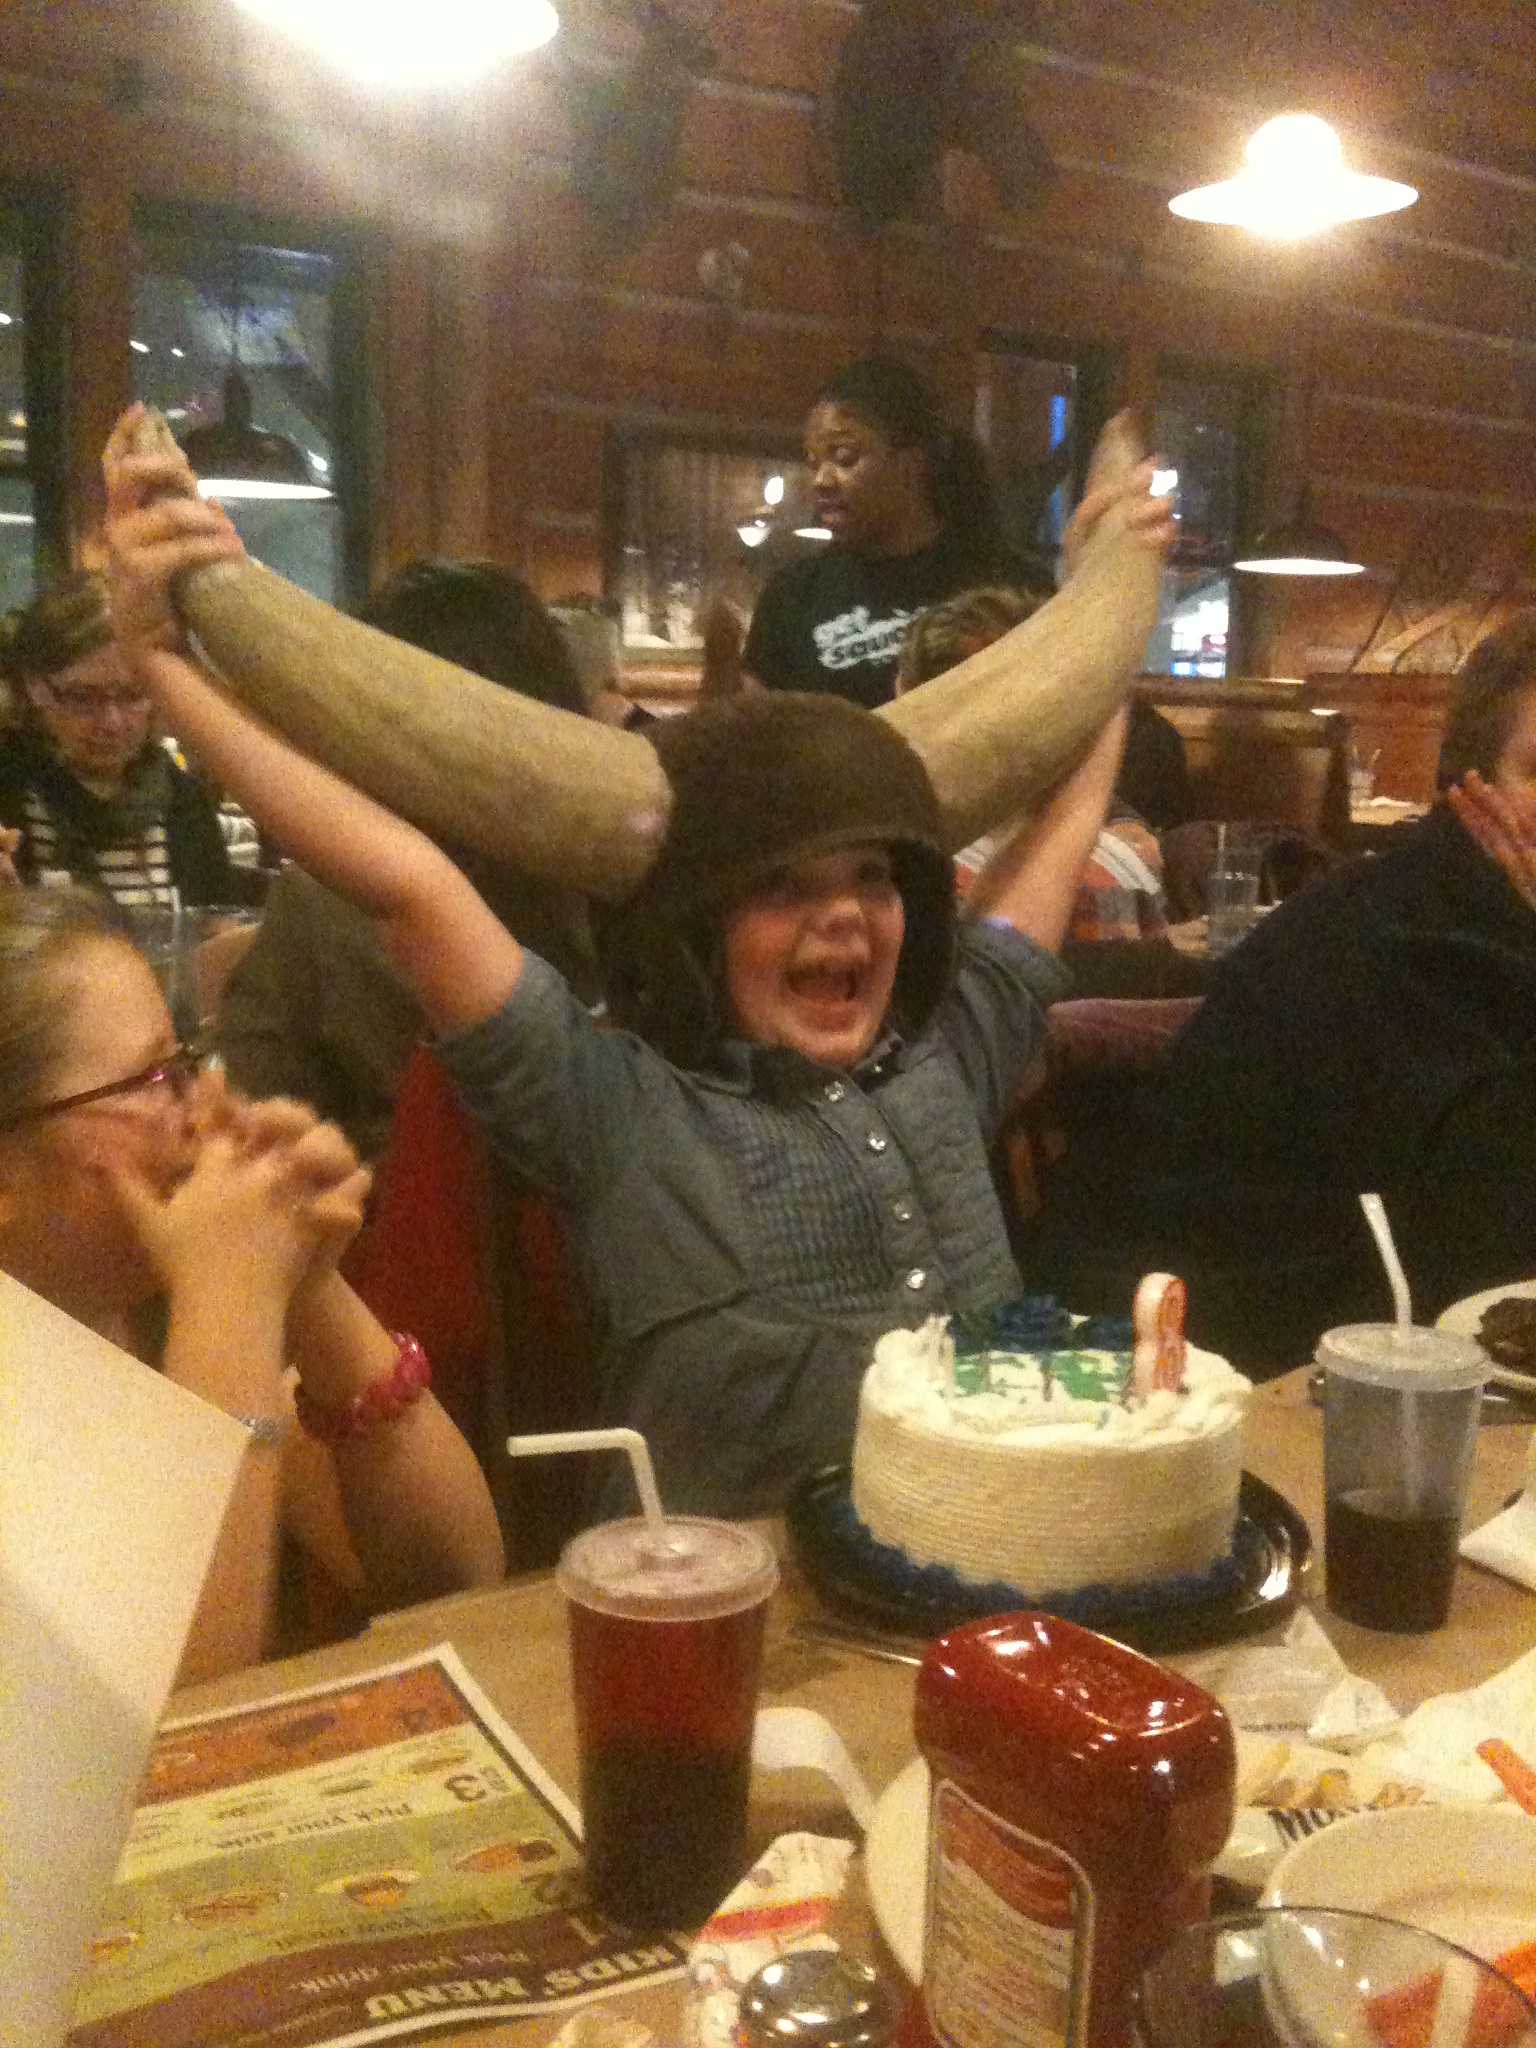 Although words are not required, this is Emily at her birthday dinner, overjoyed to be wearing the Montana's moose hat!